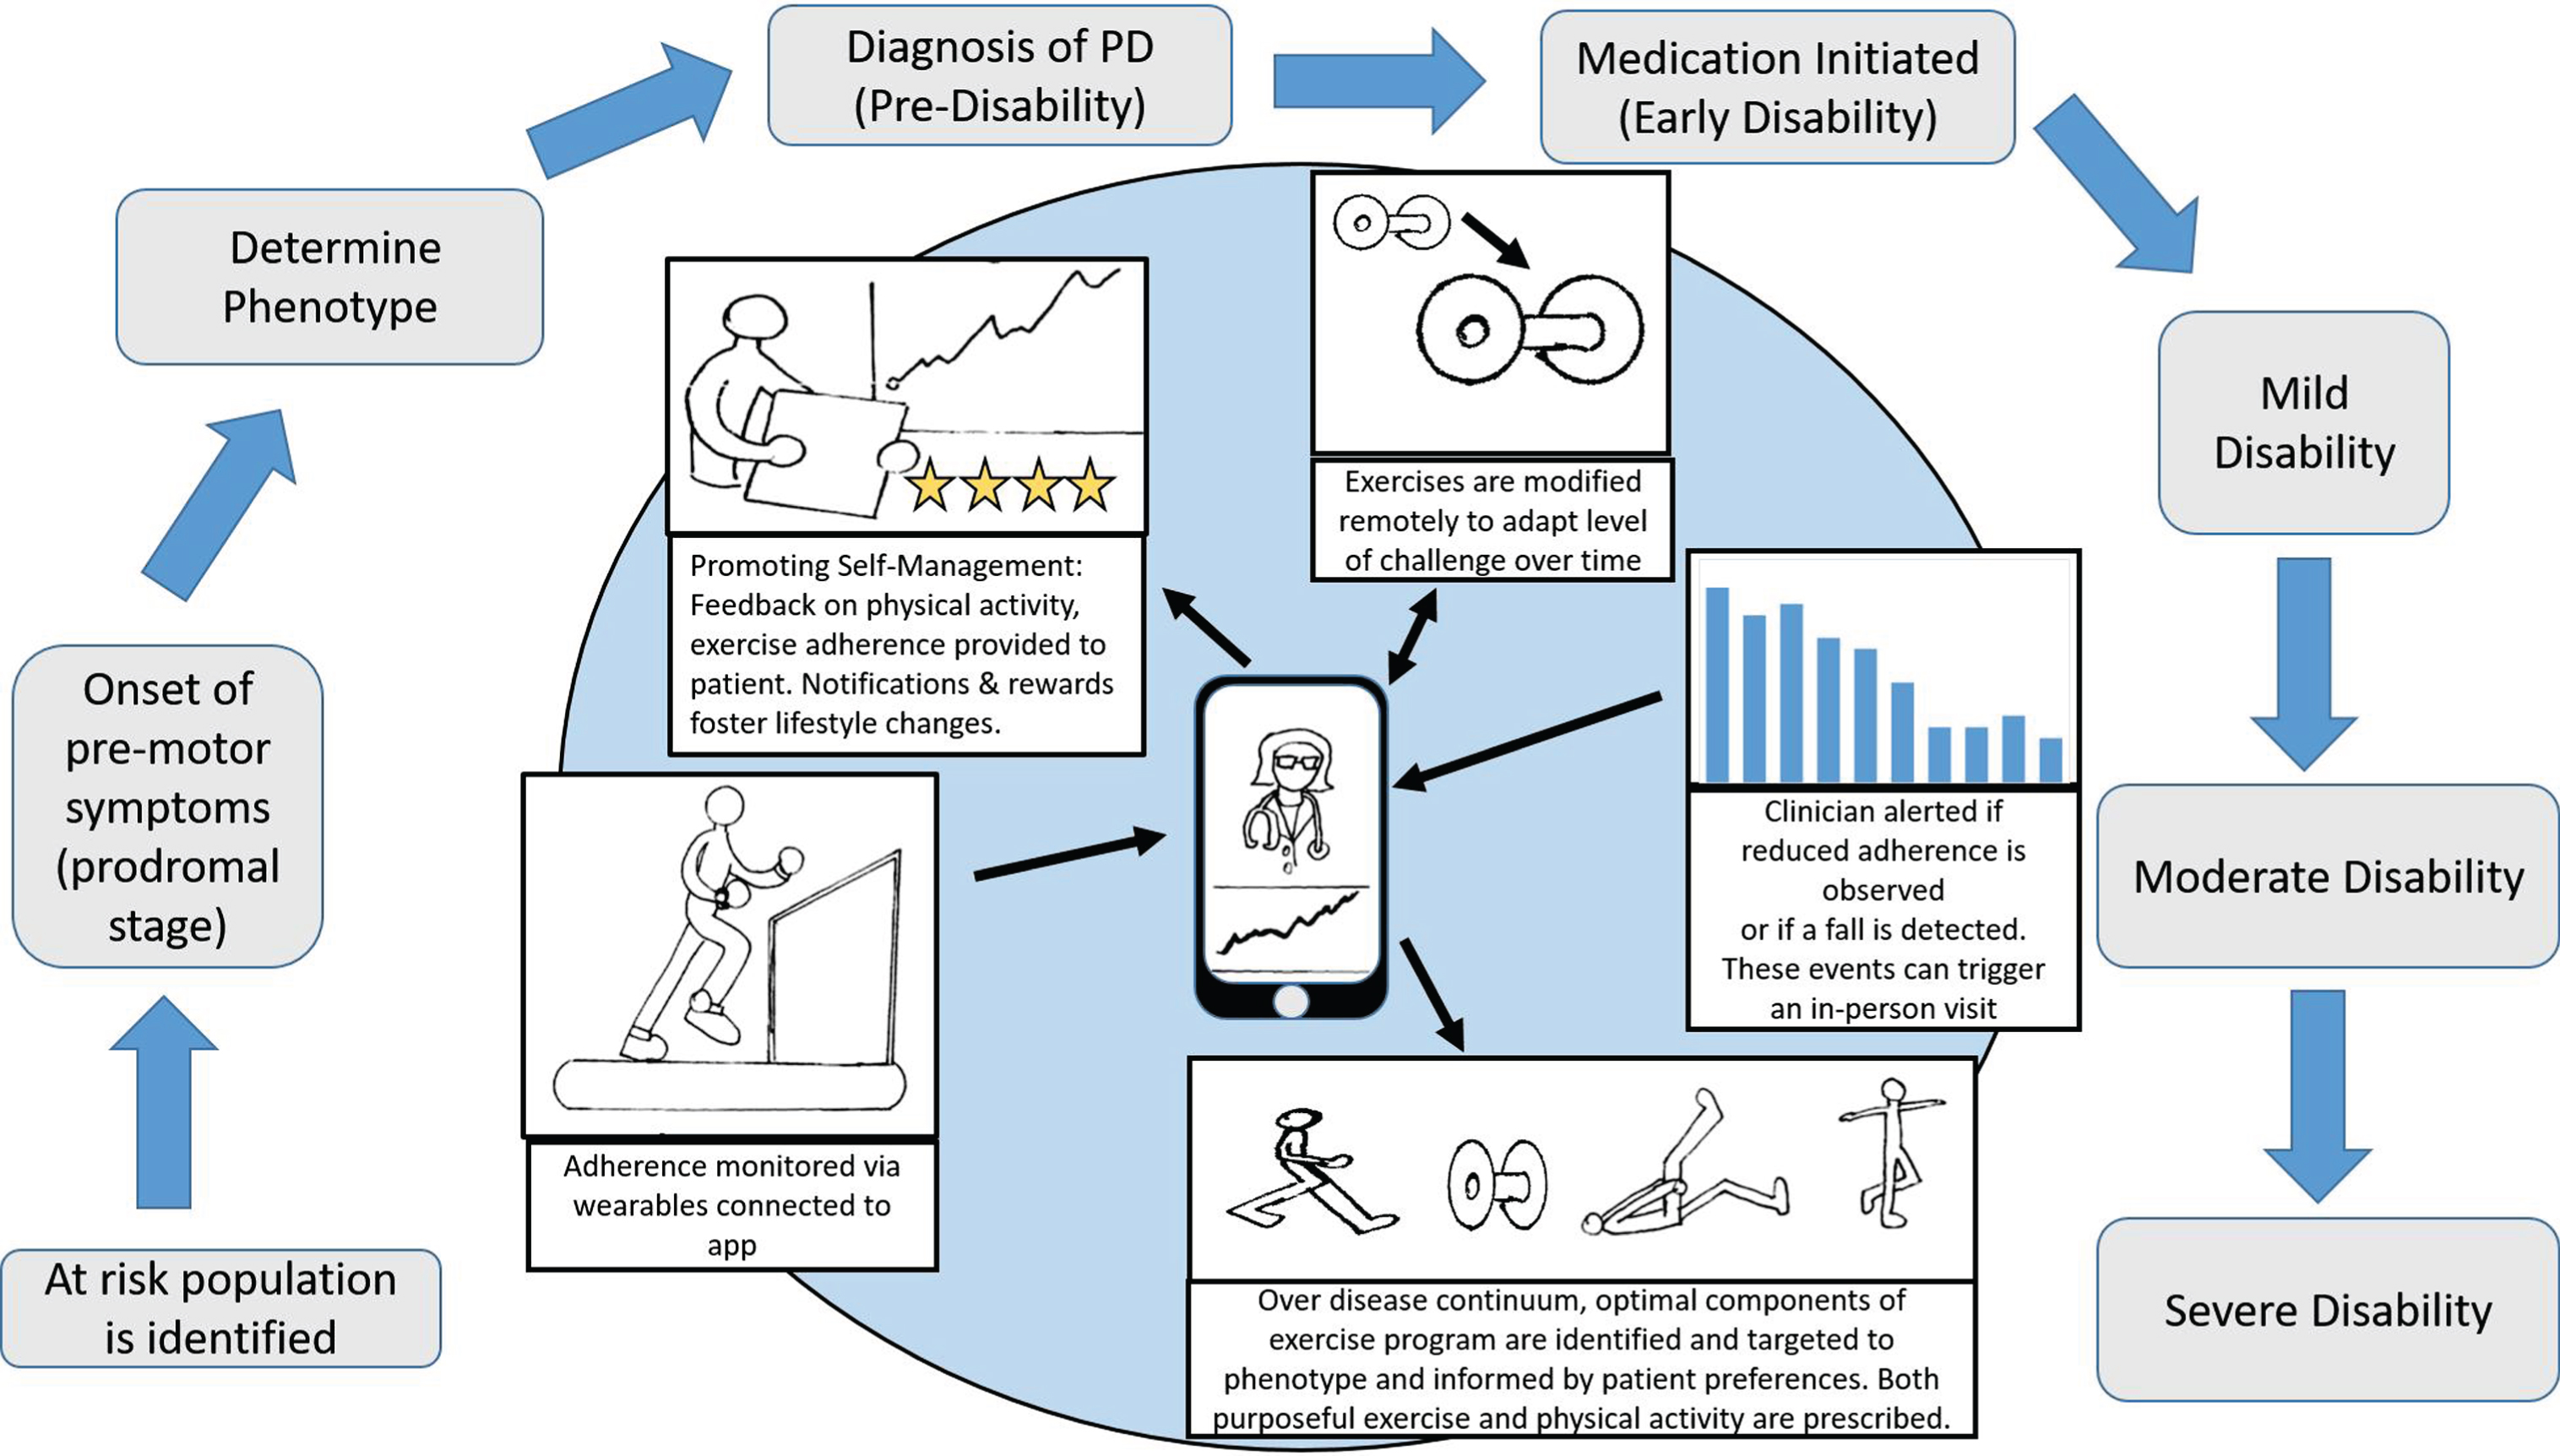 Home-based Rehabilitation Internet-of-Things to optimize exercise uptake and increase physical activity over the continuum of Parkinson’s disease (PD).